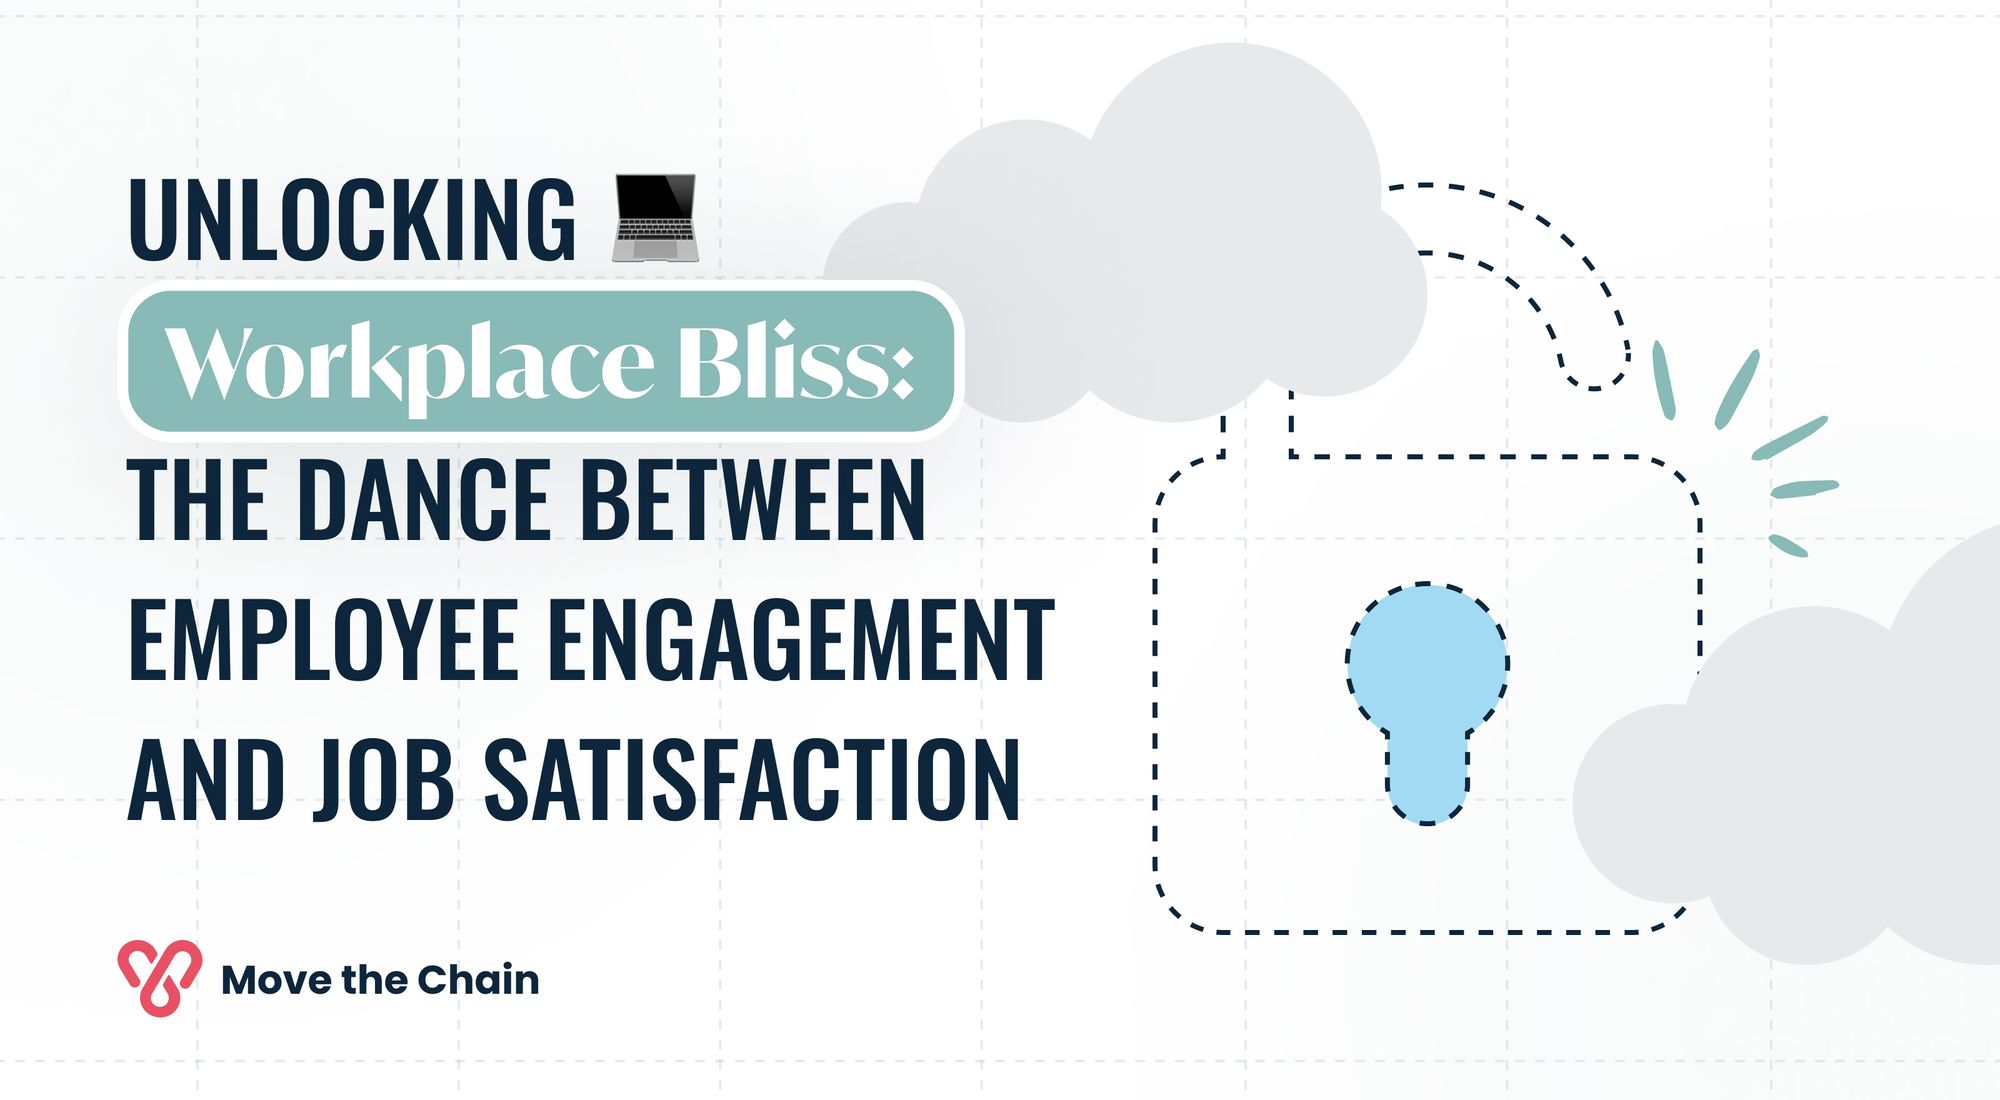 Unlocking Workplace Bliss: The Dance between Employee Engagement and Job Satisfaction